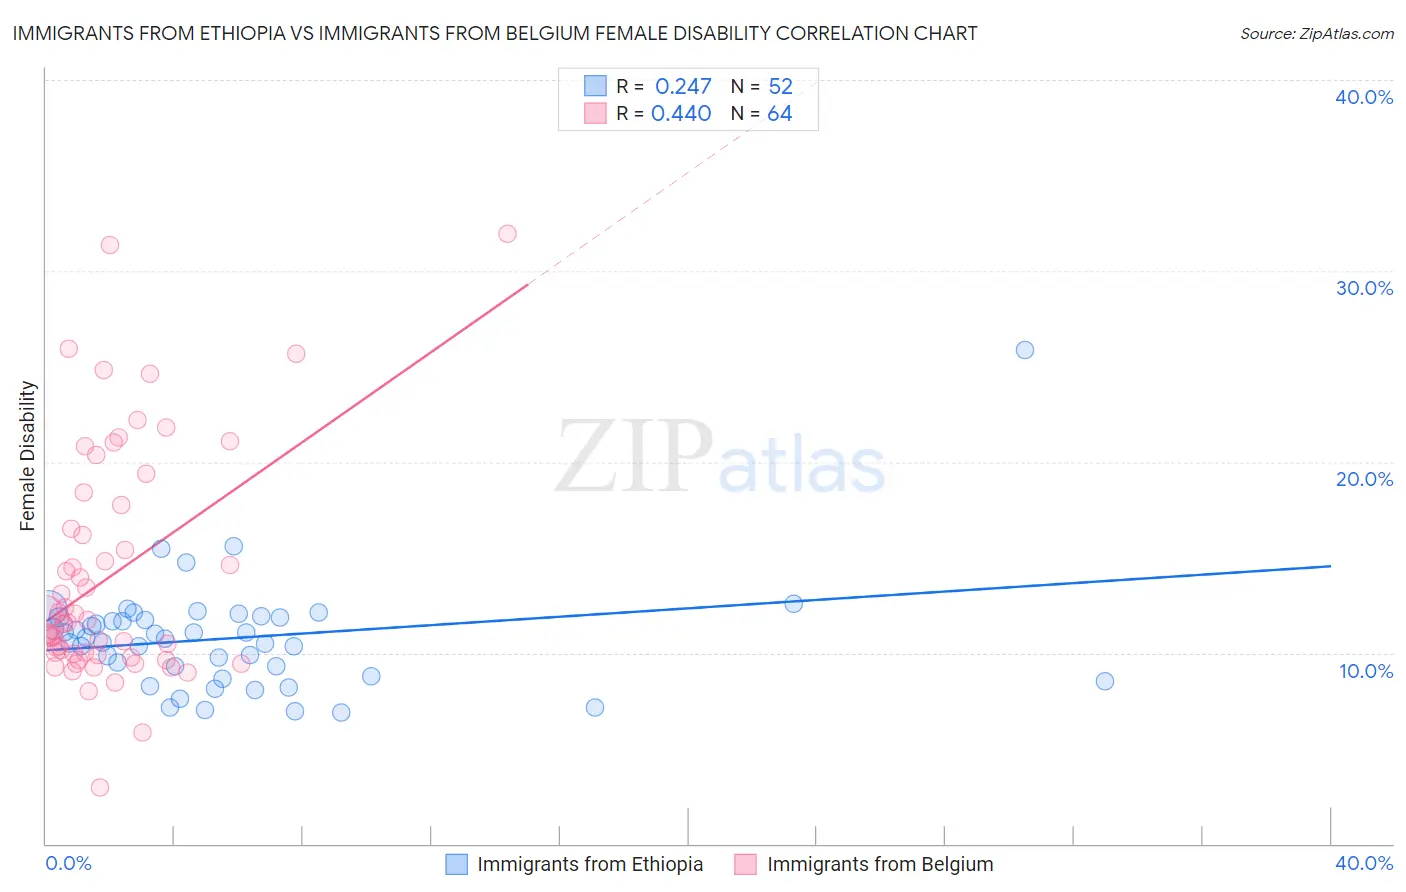 Immigrants from Ethiopia vs Immigrants from Belgium Female Disability